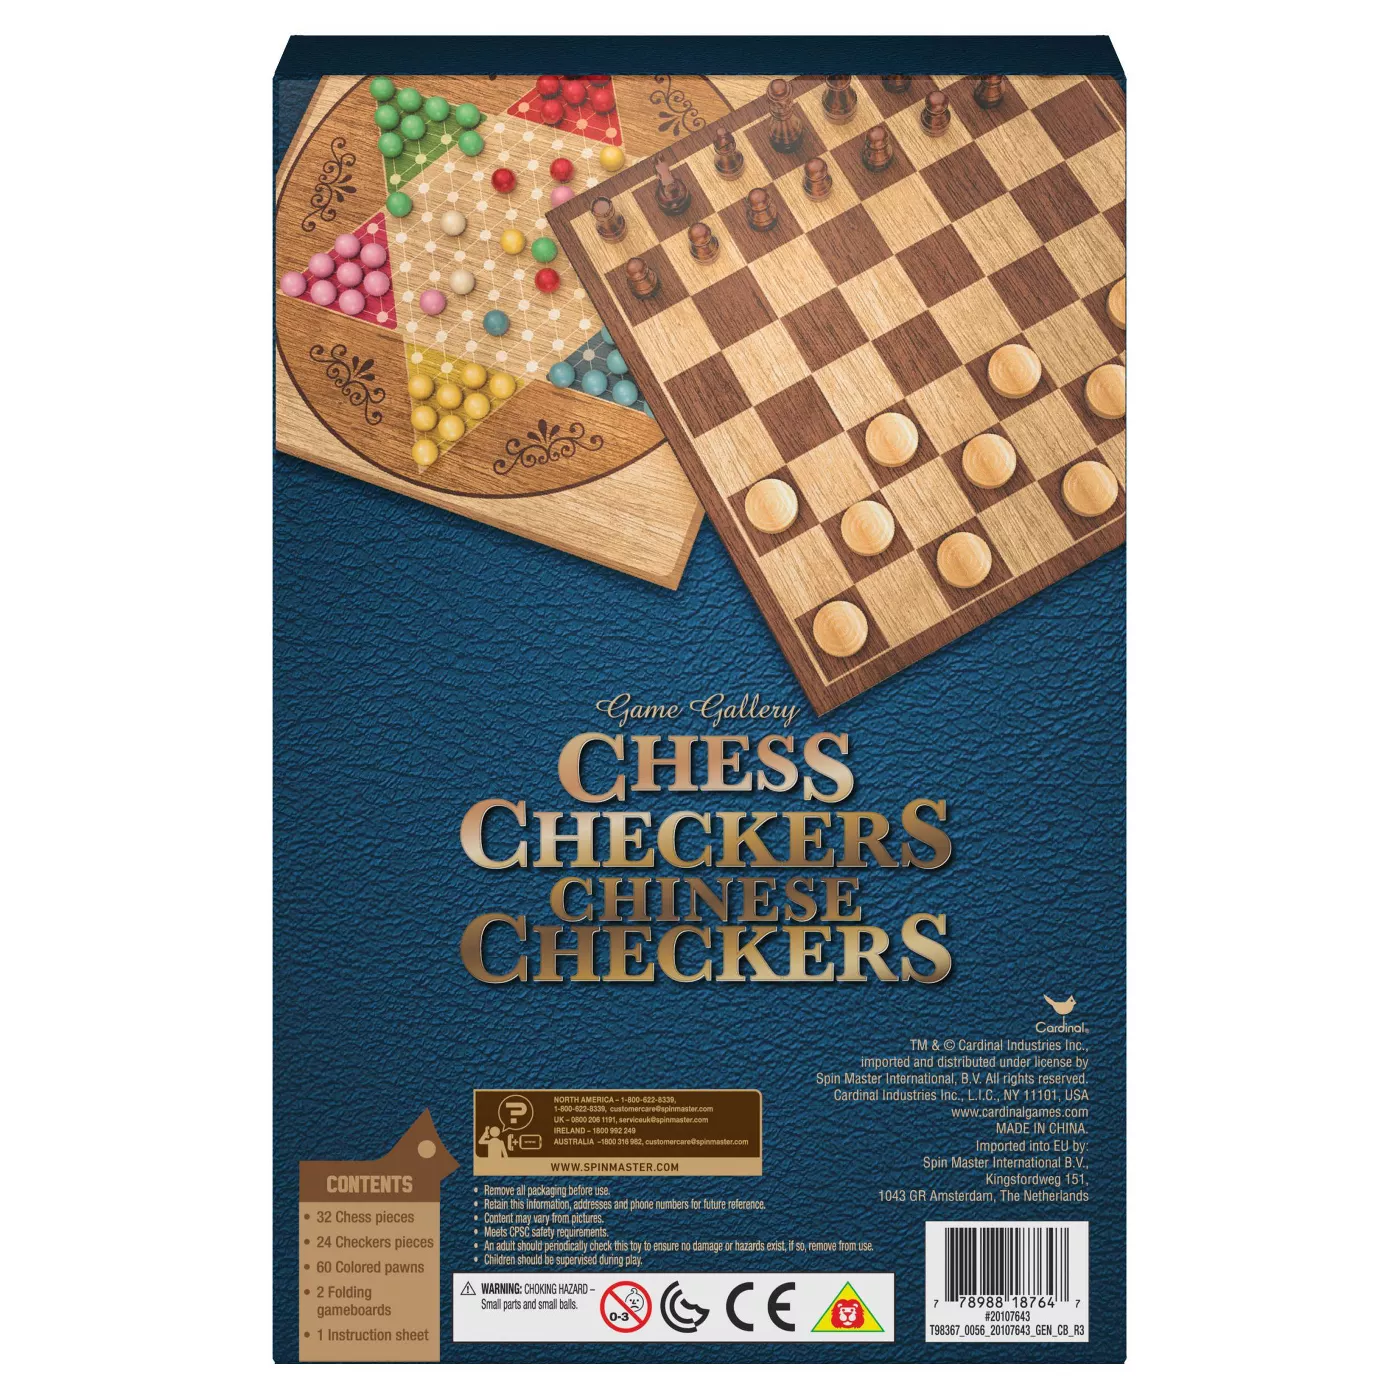 A chess, checkers, and chinese checkers board game set